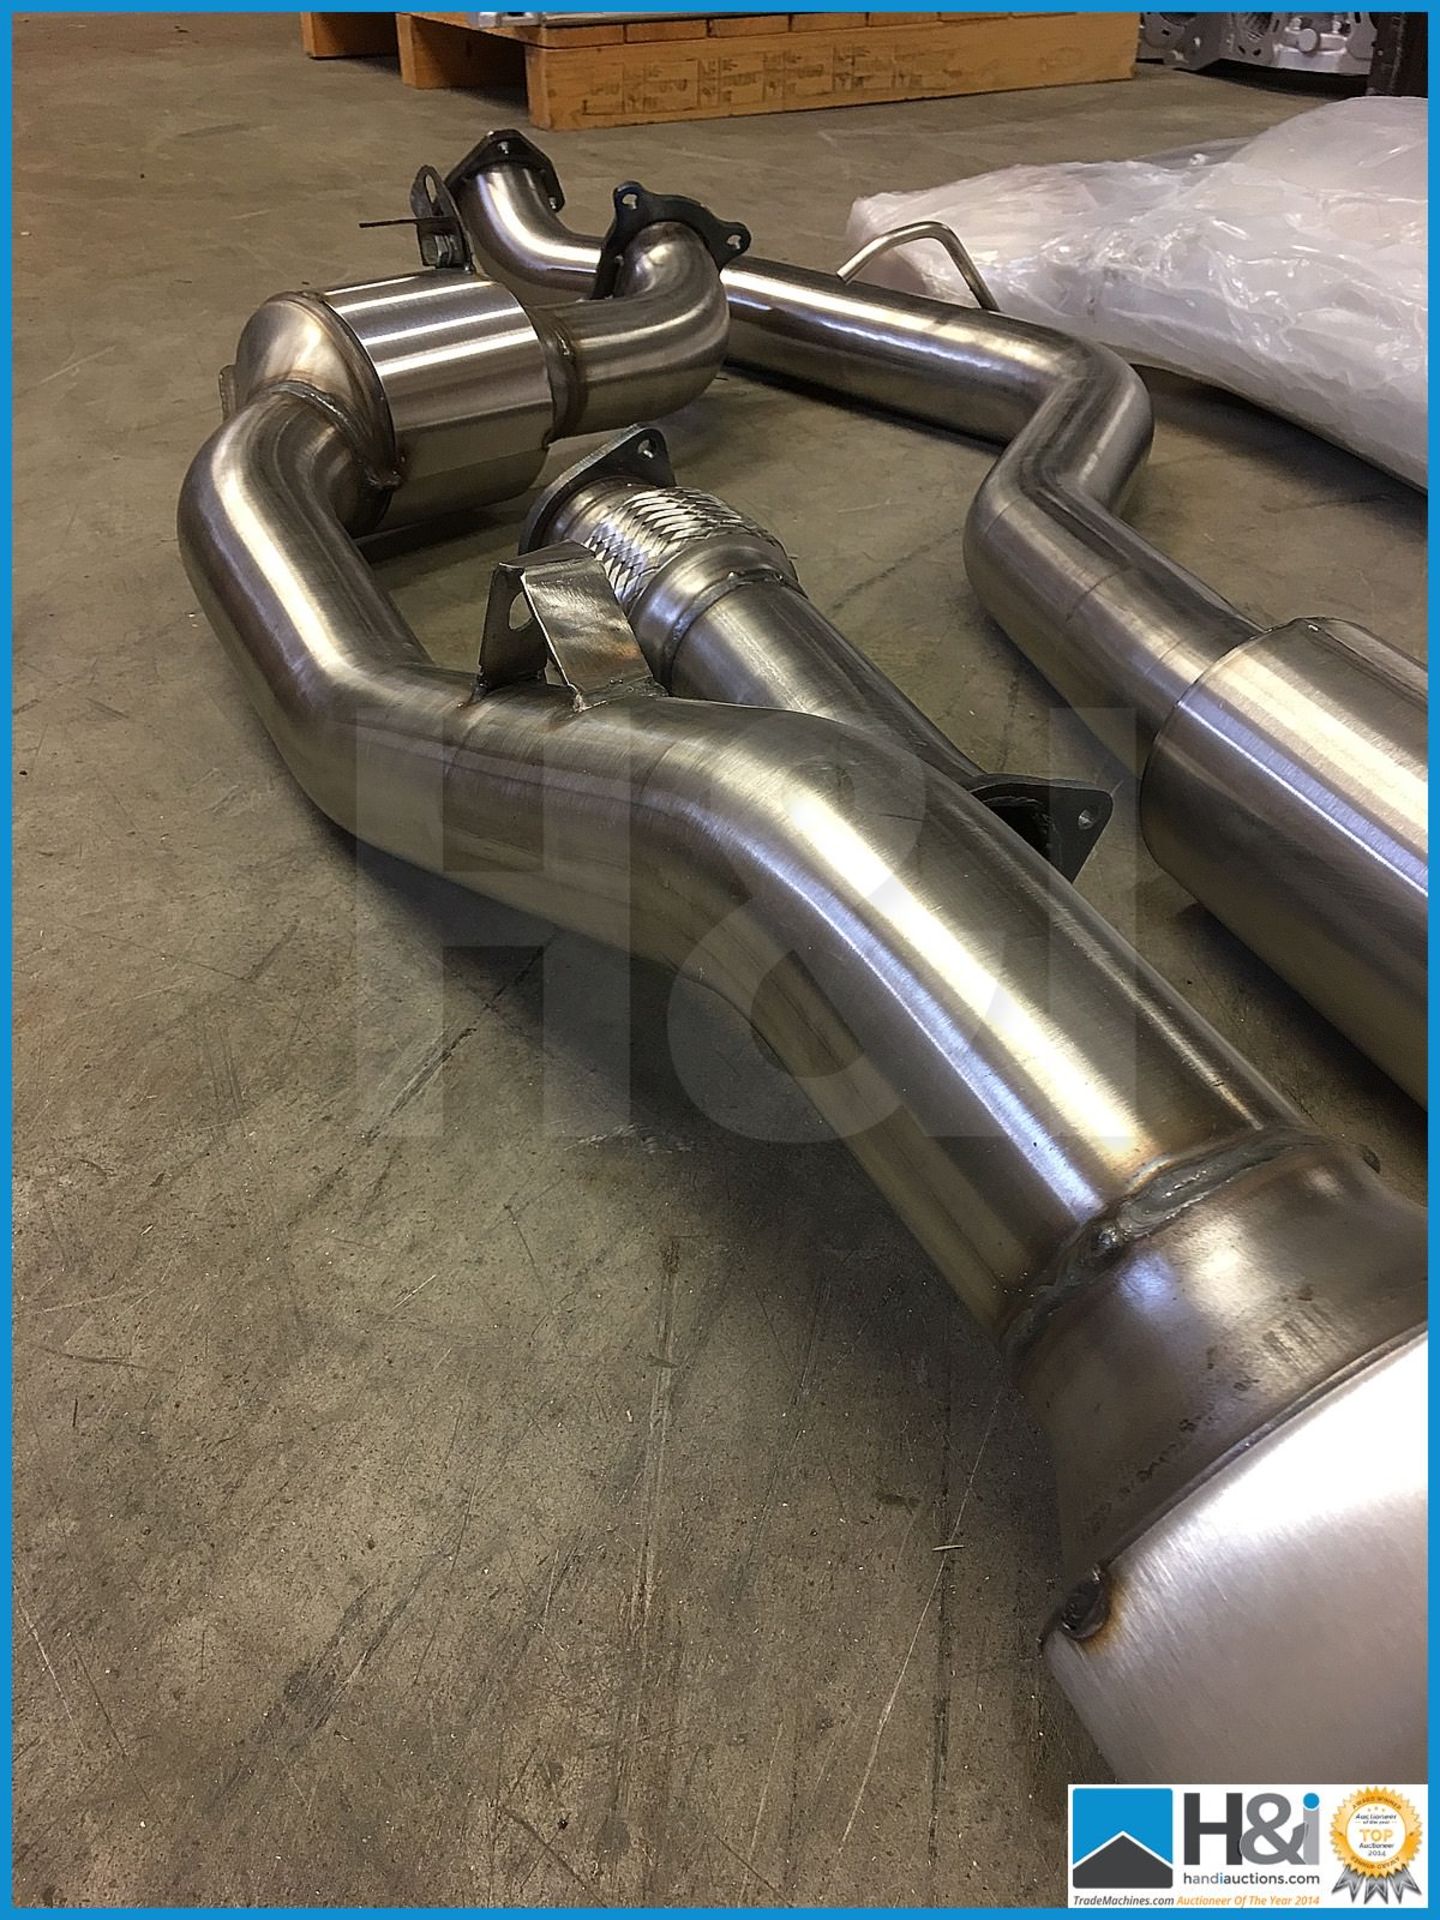 Subaru CS400 exhaust system. Last ones available in the world -- MC:N/A CILN:N/A - Image 3 of 6